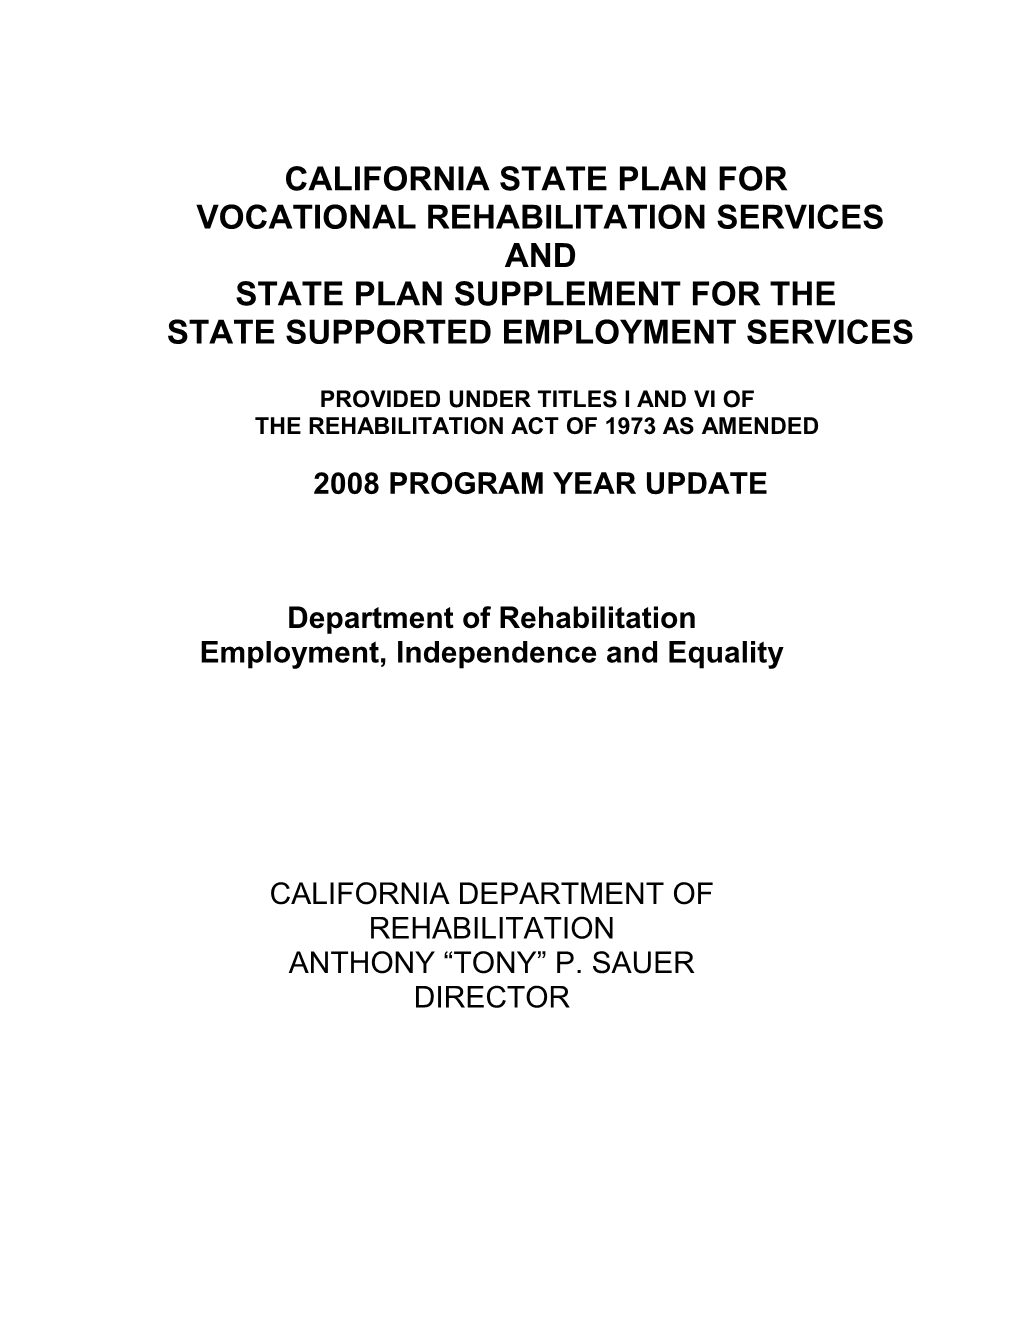 Summary of Input Provided by the State Rehabilitation Council